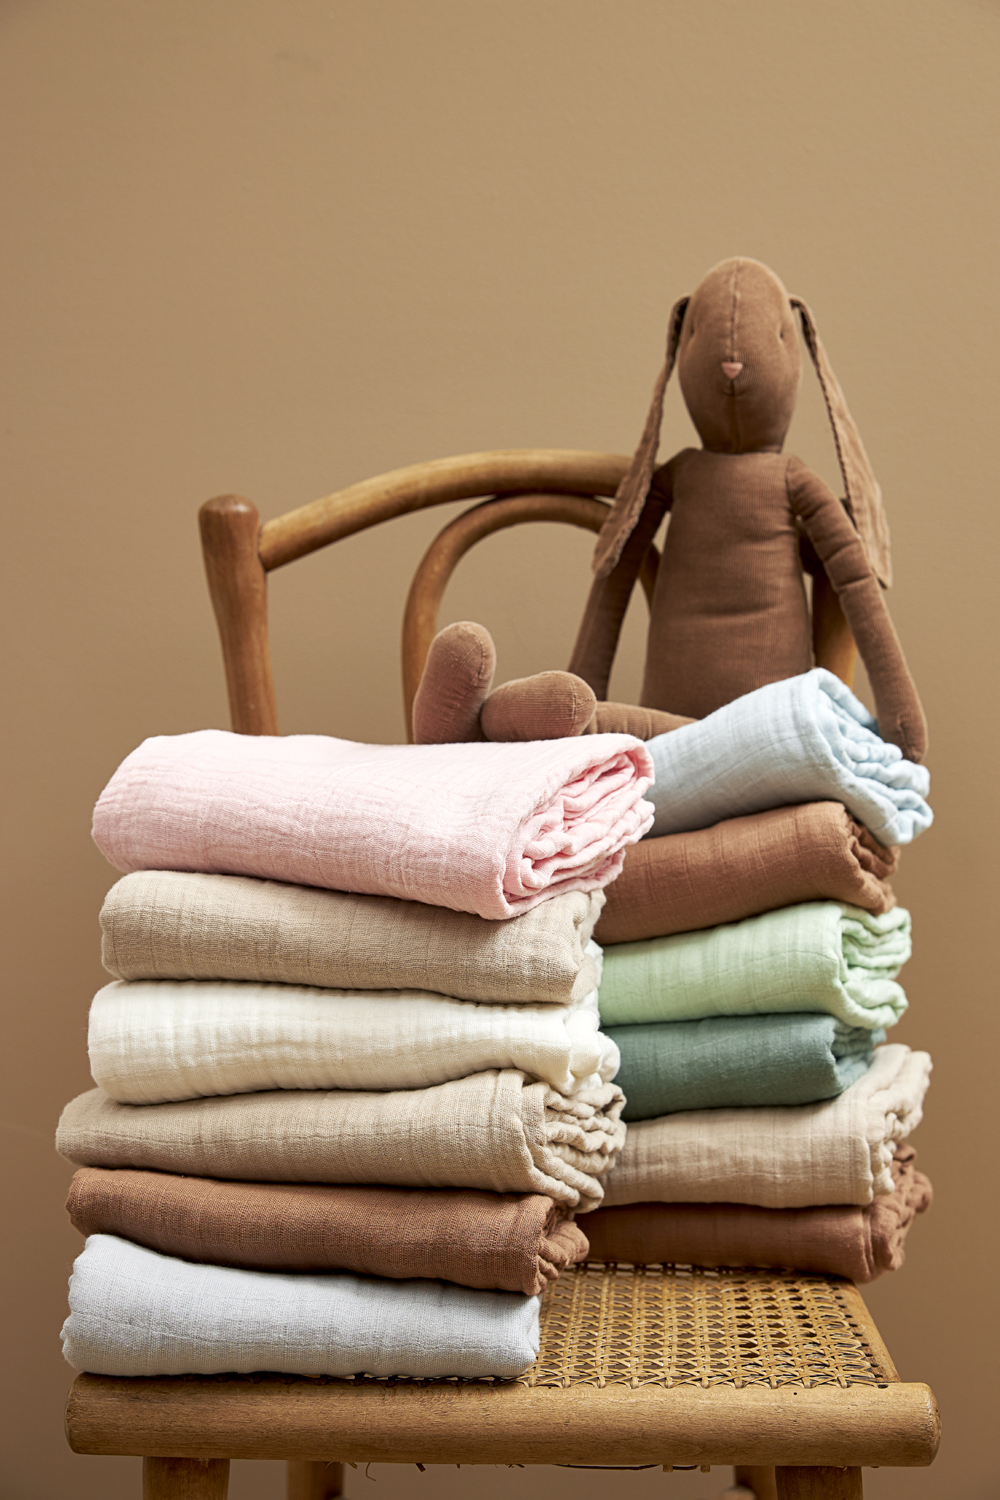 Swaddle  2er pack pre-washed musselin Uni - sand/toffee - 120x120cm